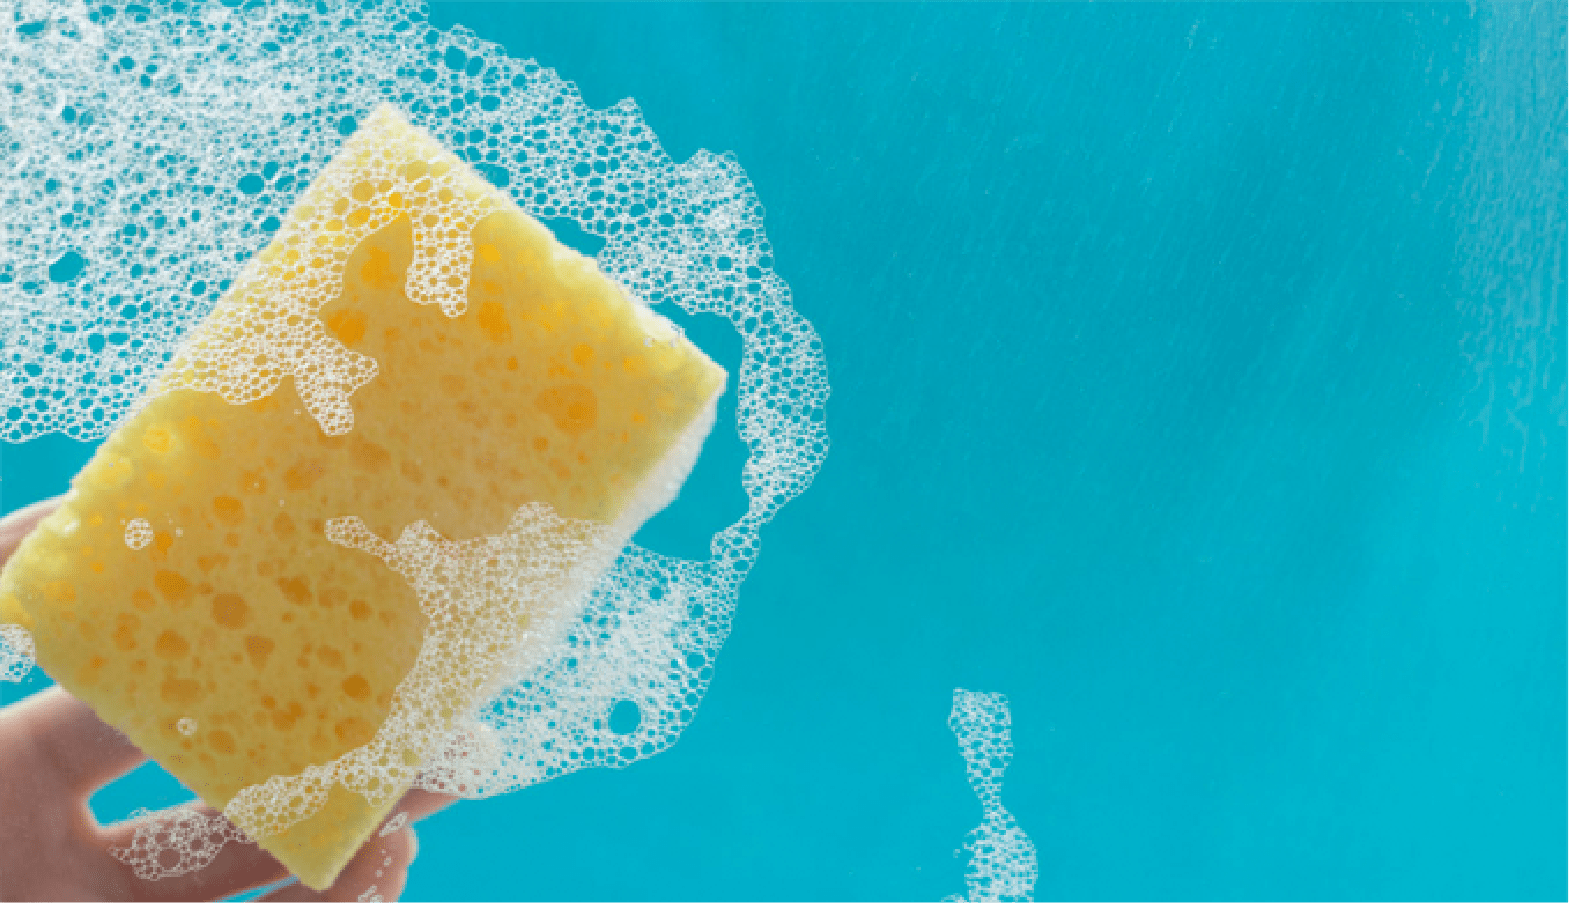 Soapy yellow sponge on blue background